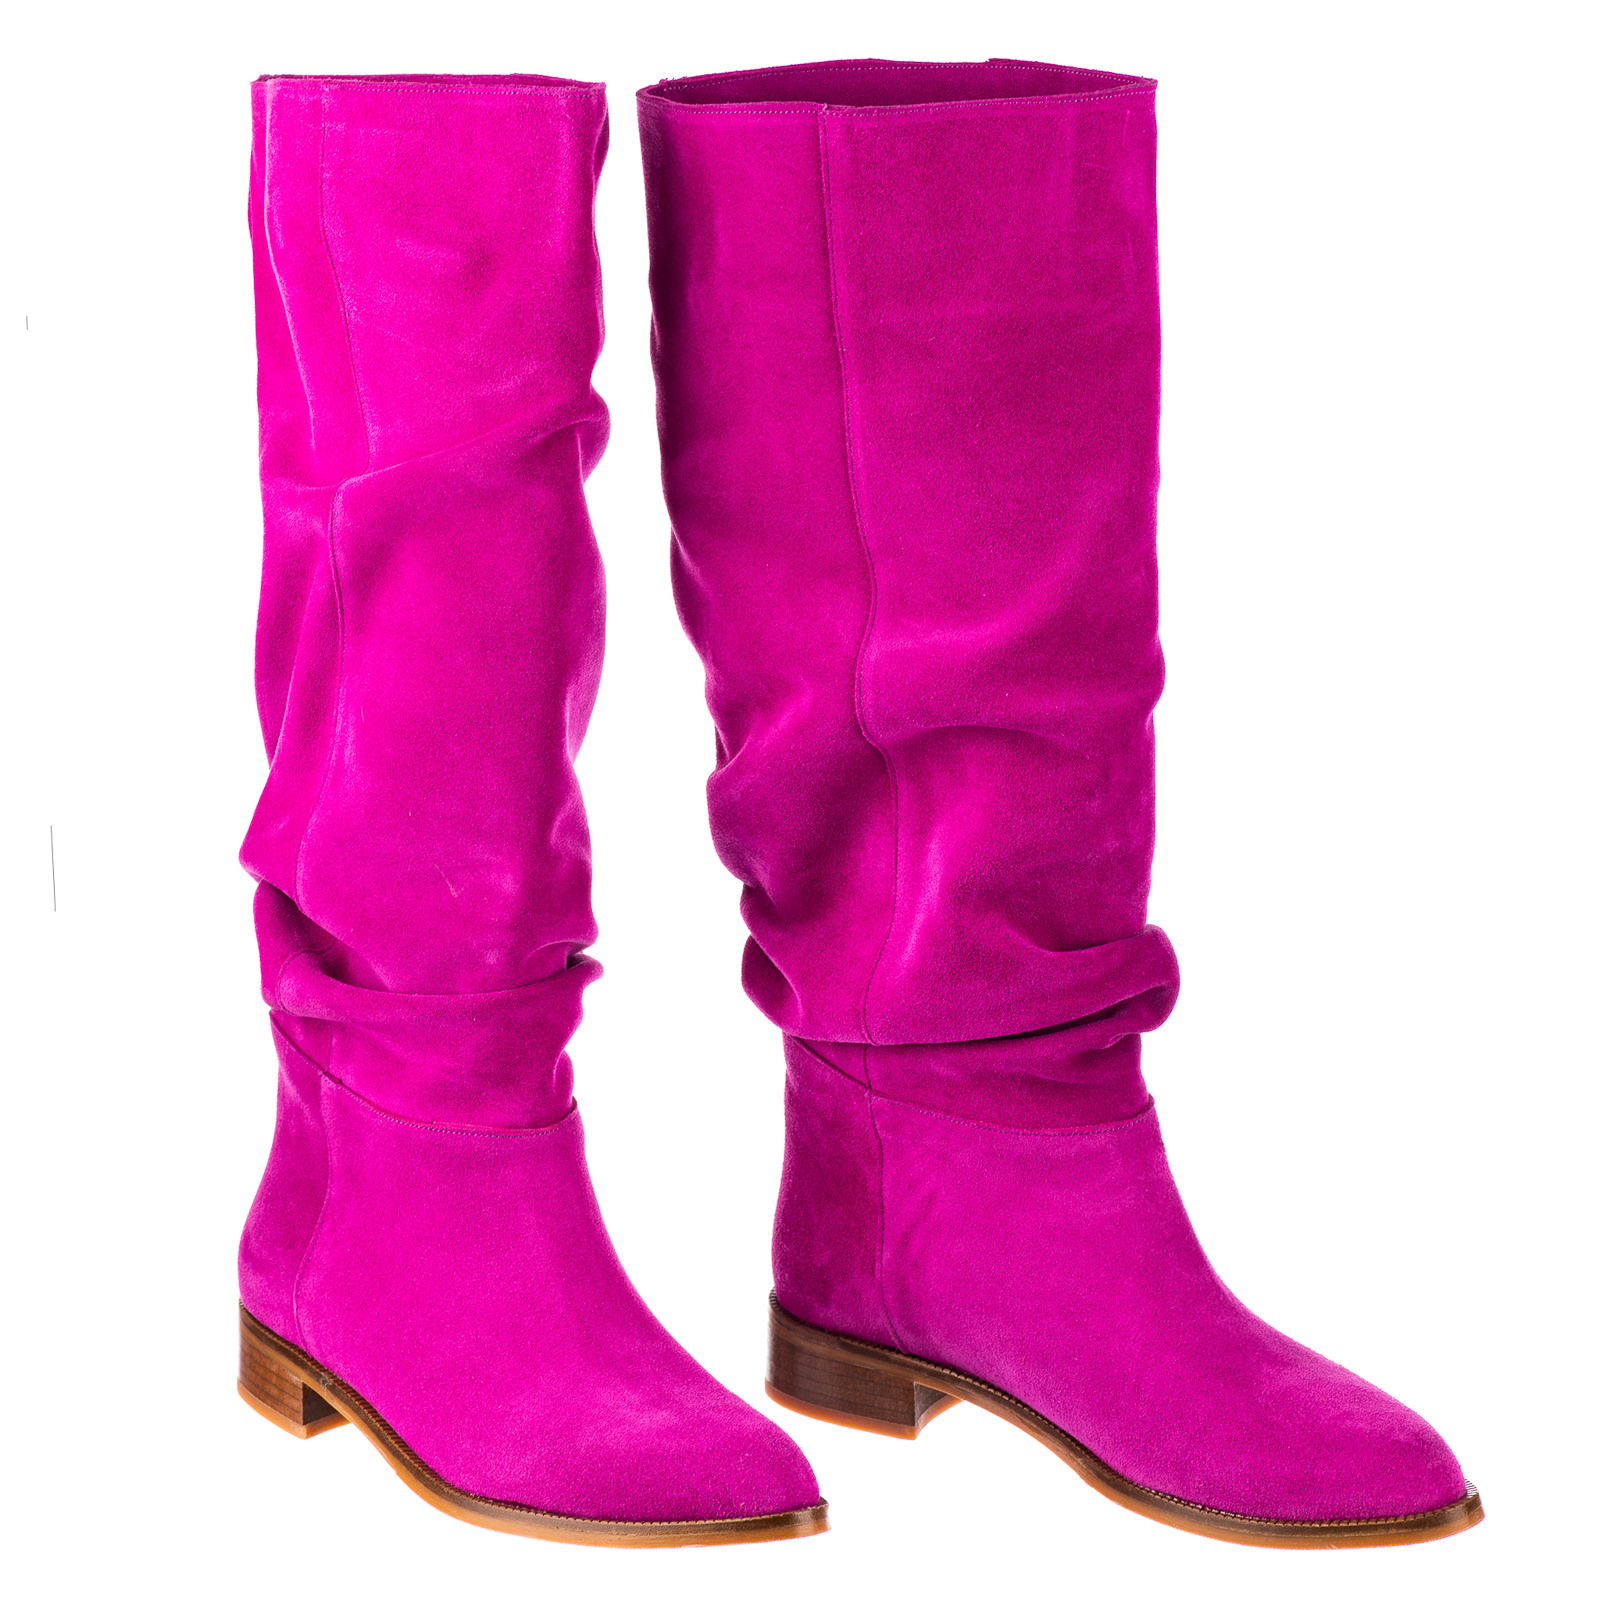 Leather boots B736 - PINK